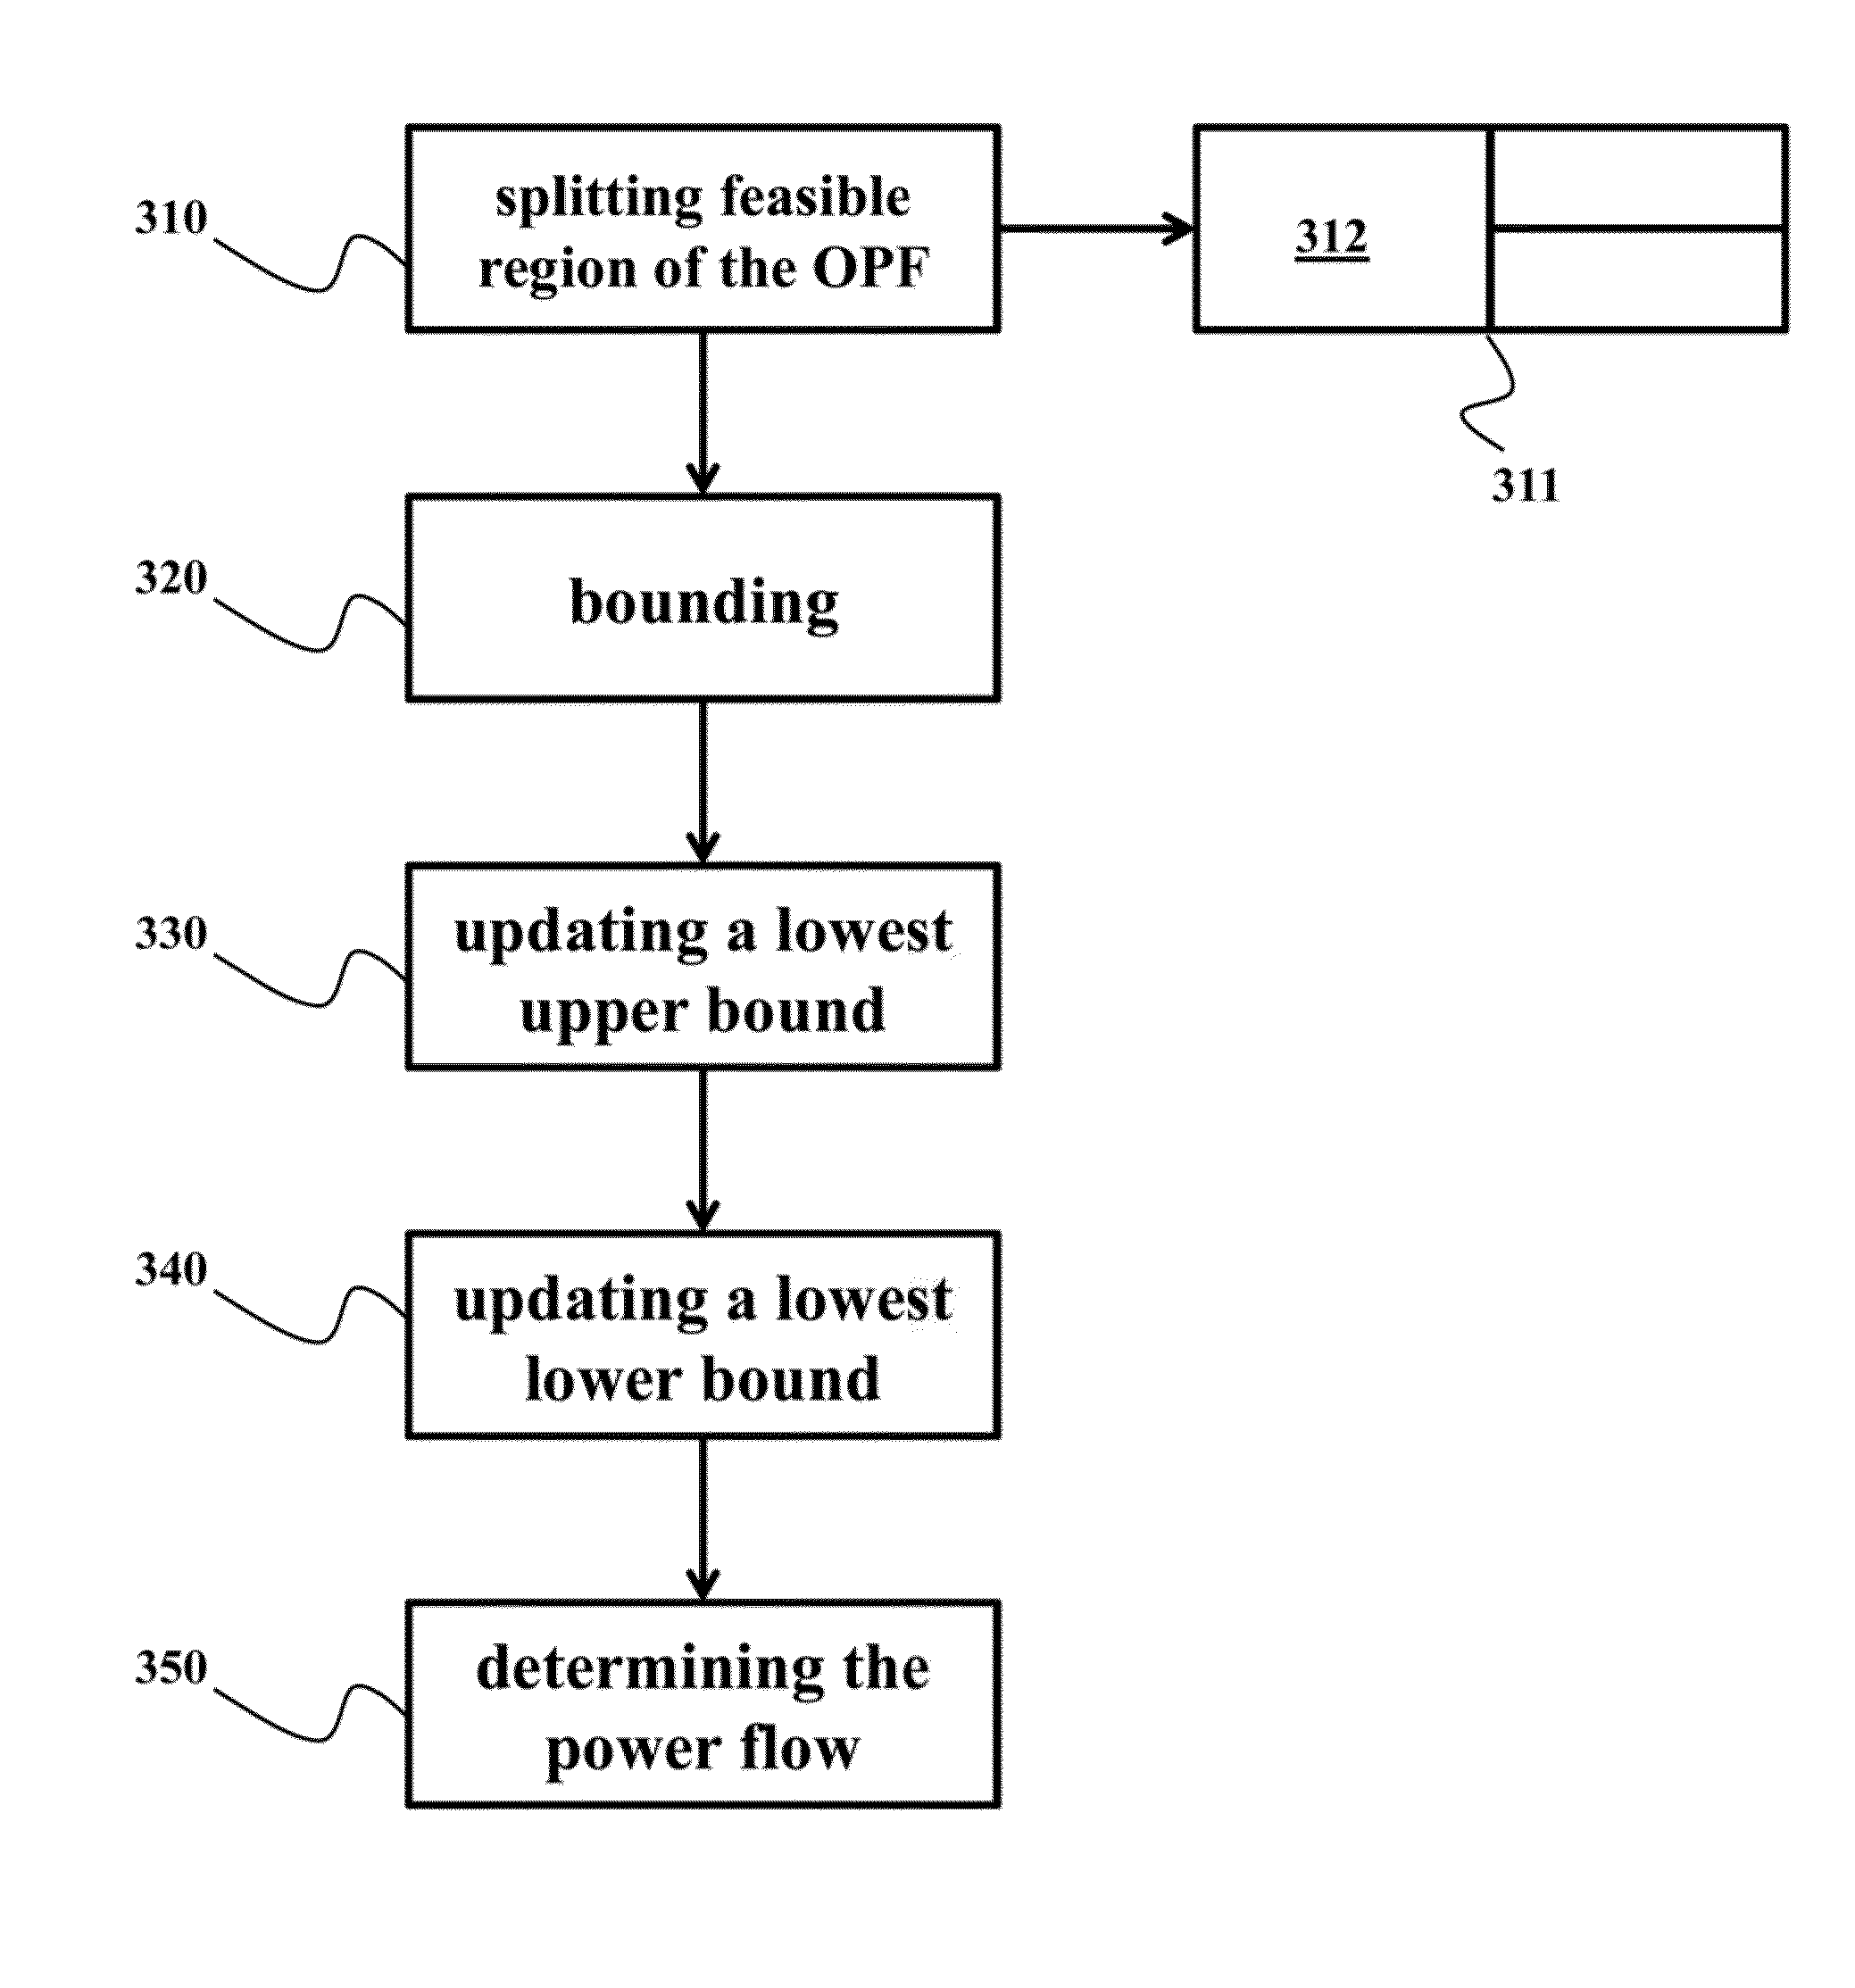 System and Method for Optimal Power Flow Analysis